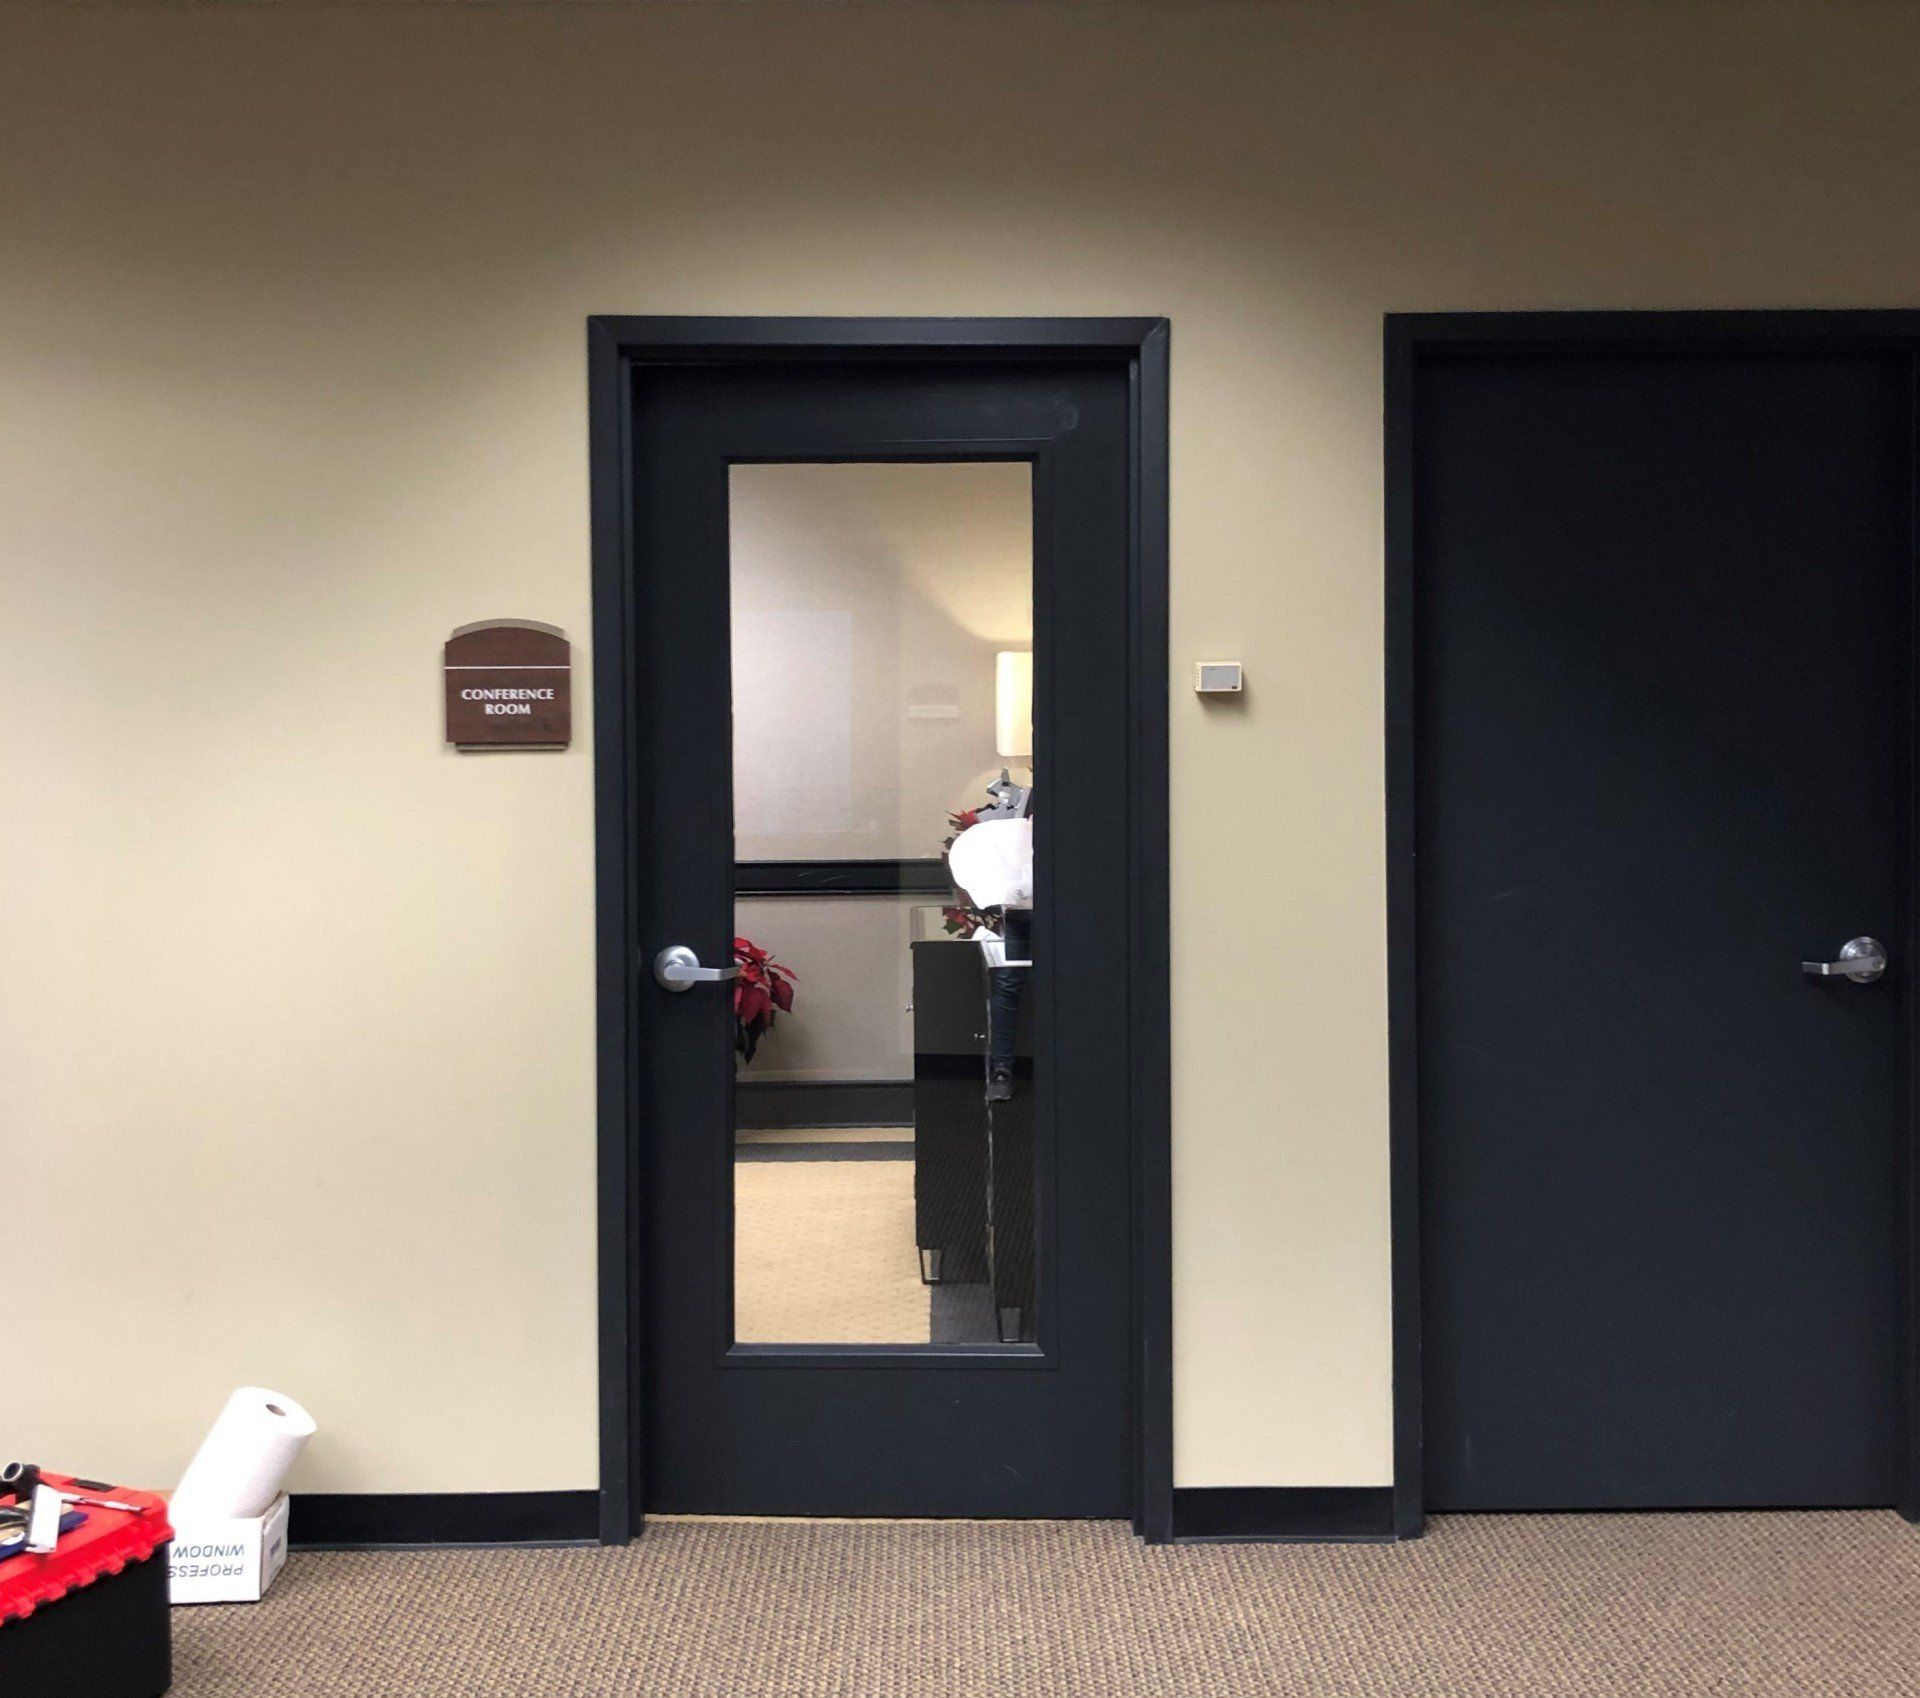 Decorative and Smart Tint installation service - Privacy gained while revamping the inner office style on 12.12.2019 in Montgomery, AL